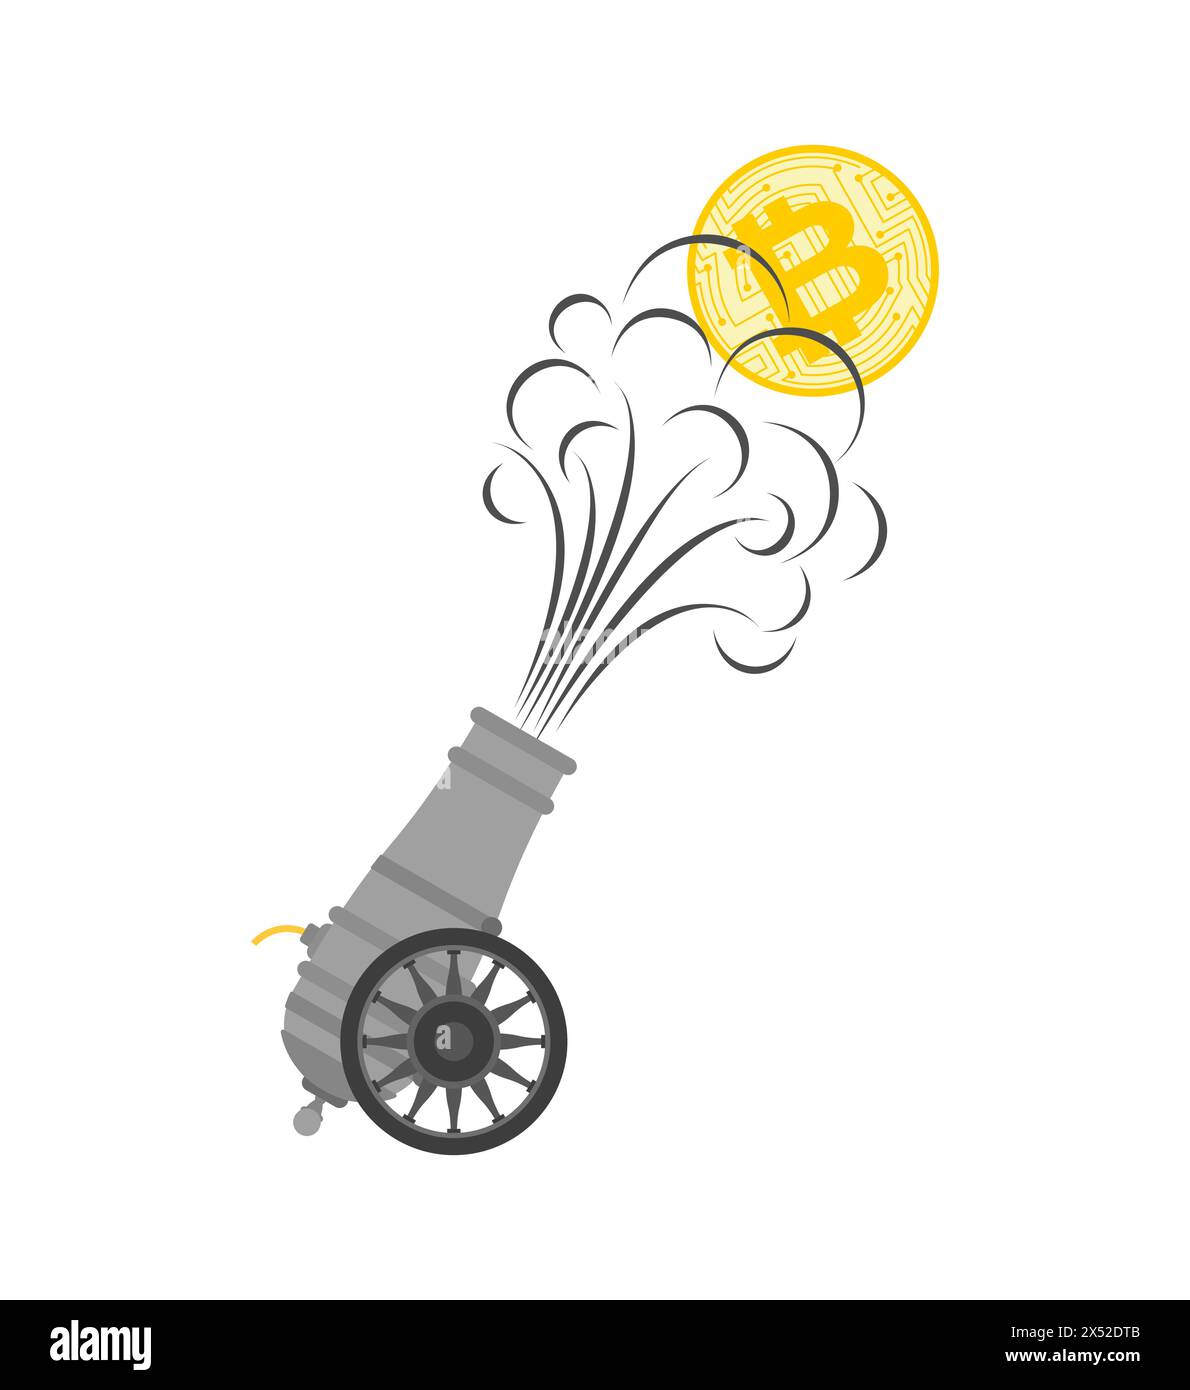 Bitcoin growth. Ancient cannon shoots bitcoin. Cannon with gun carriage shot cryptocurrency. Carriage gun icon Stock Vector